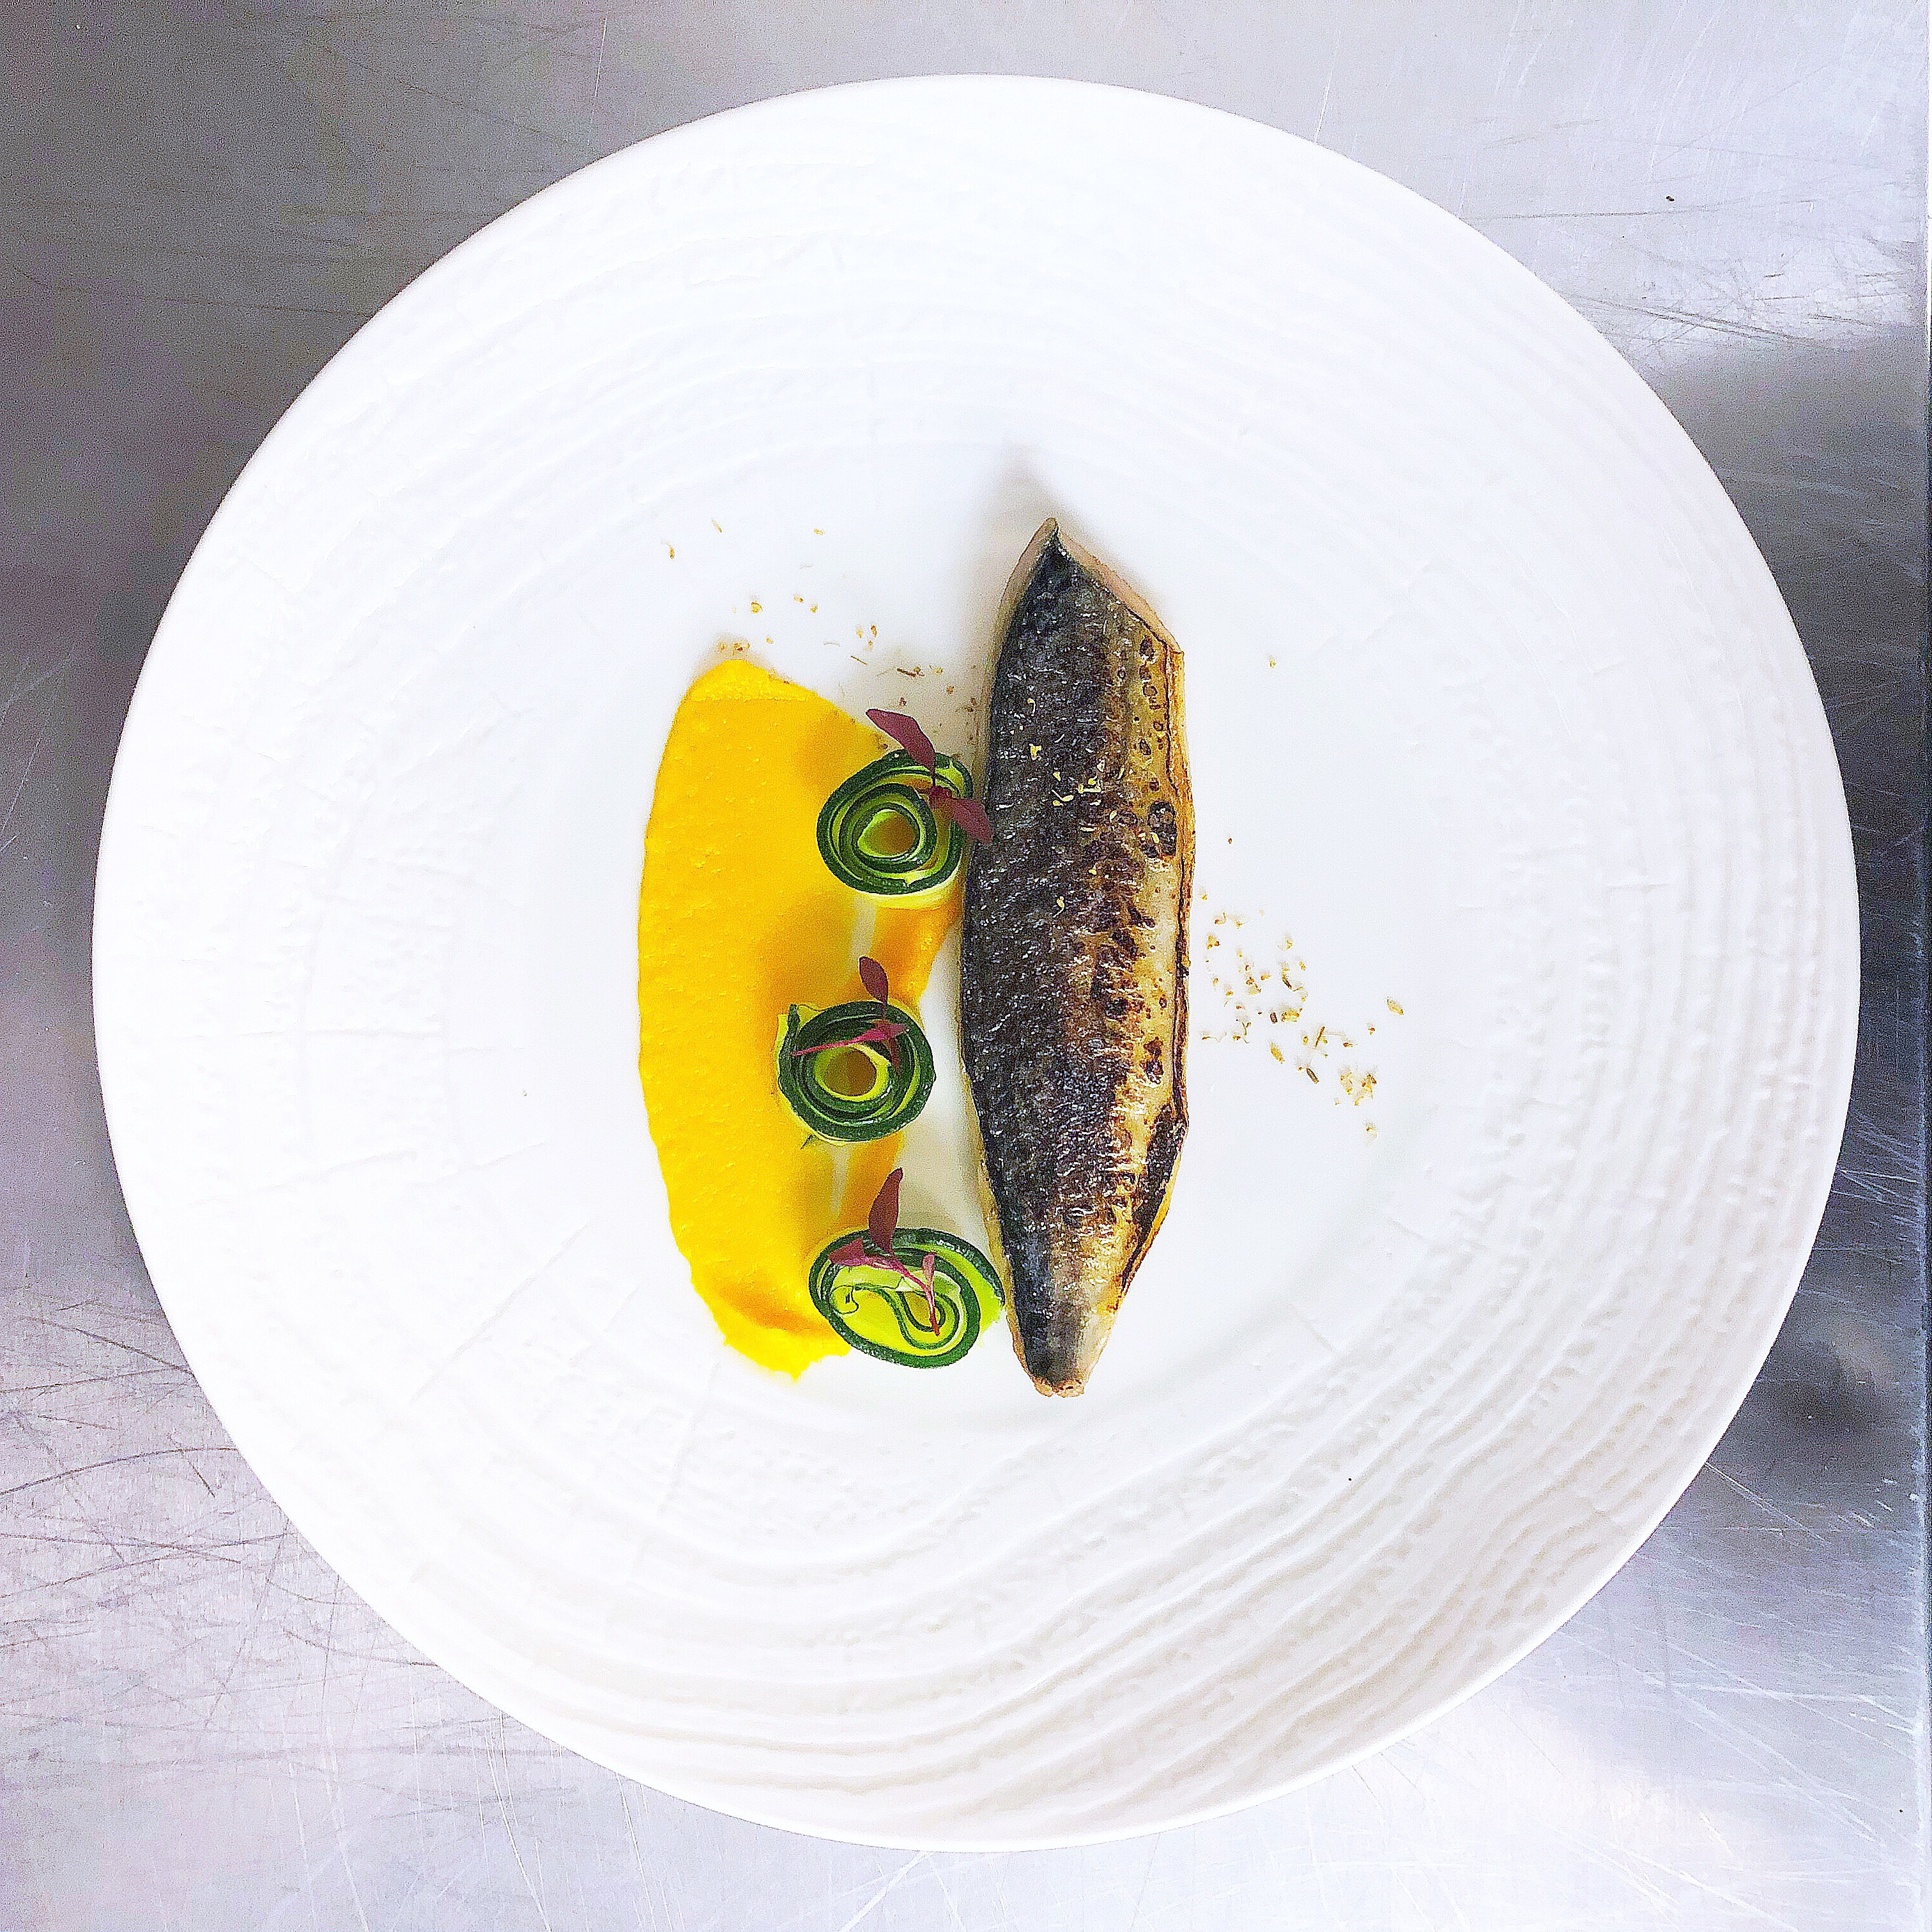 Hot smoked mackerel, butternut squash and courgettes.